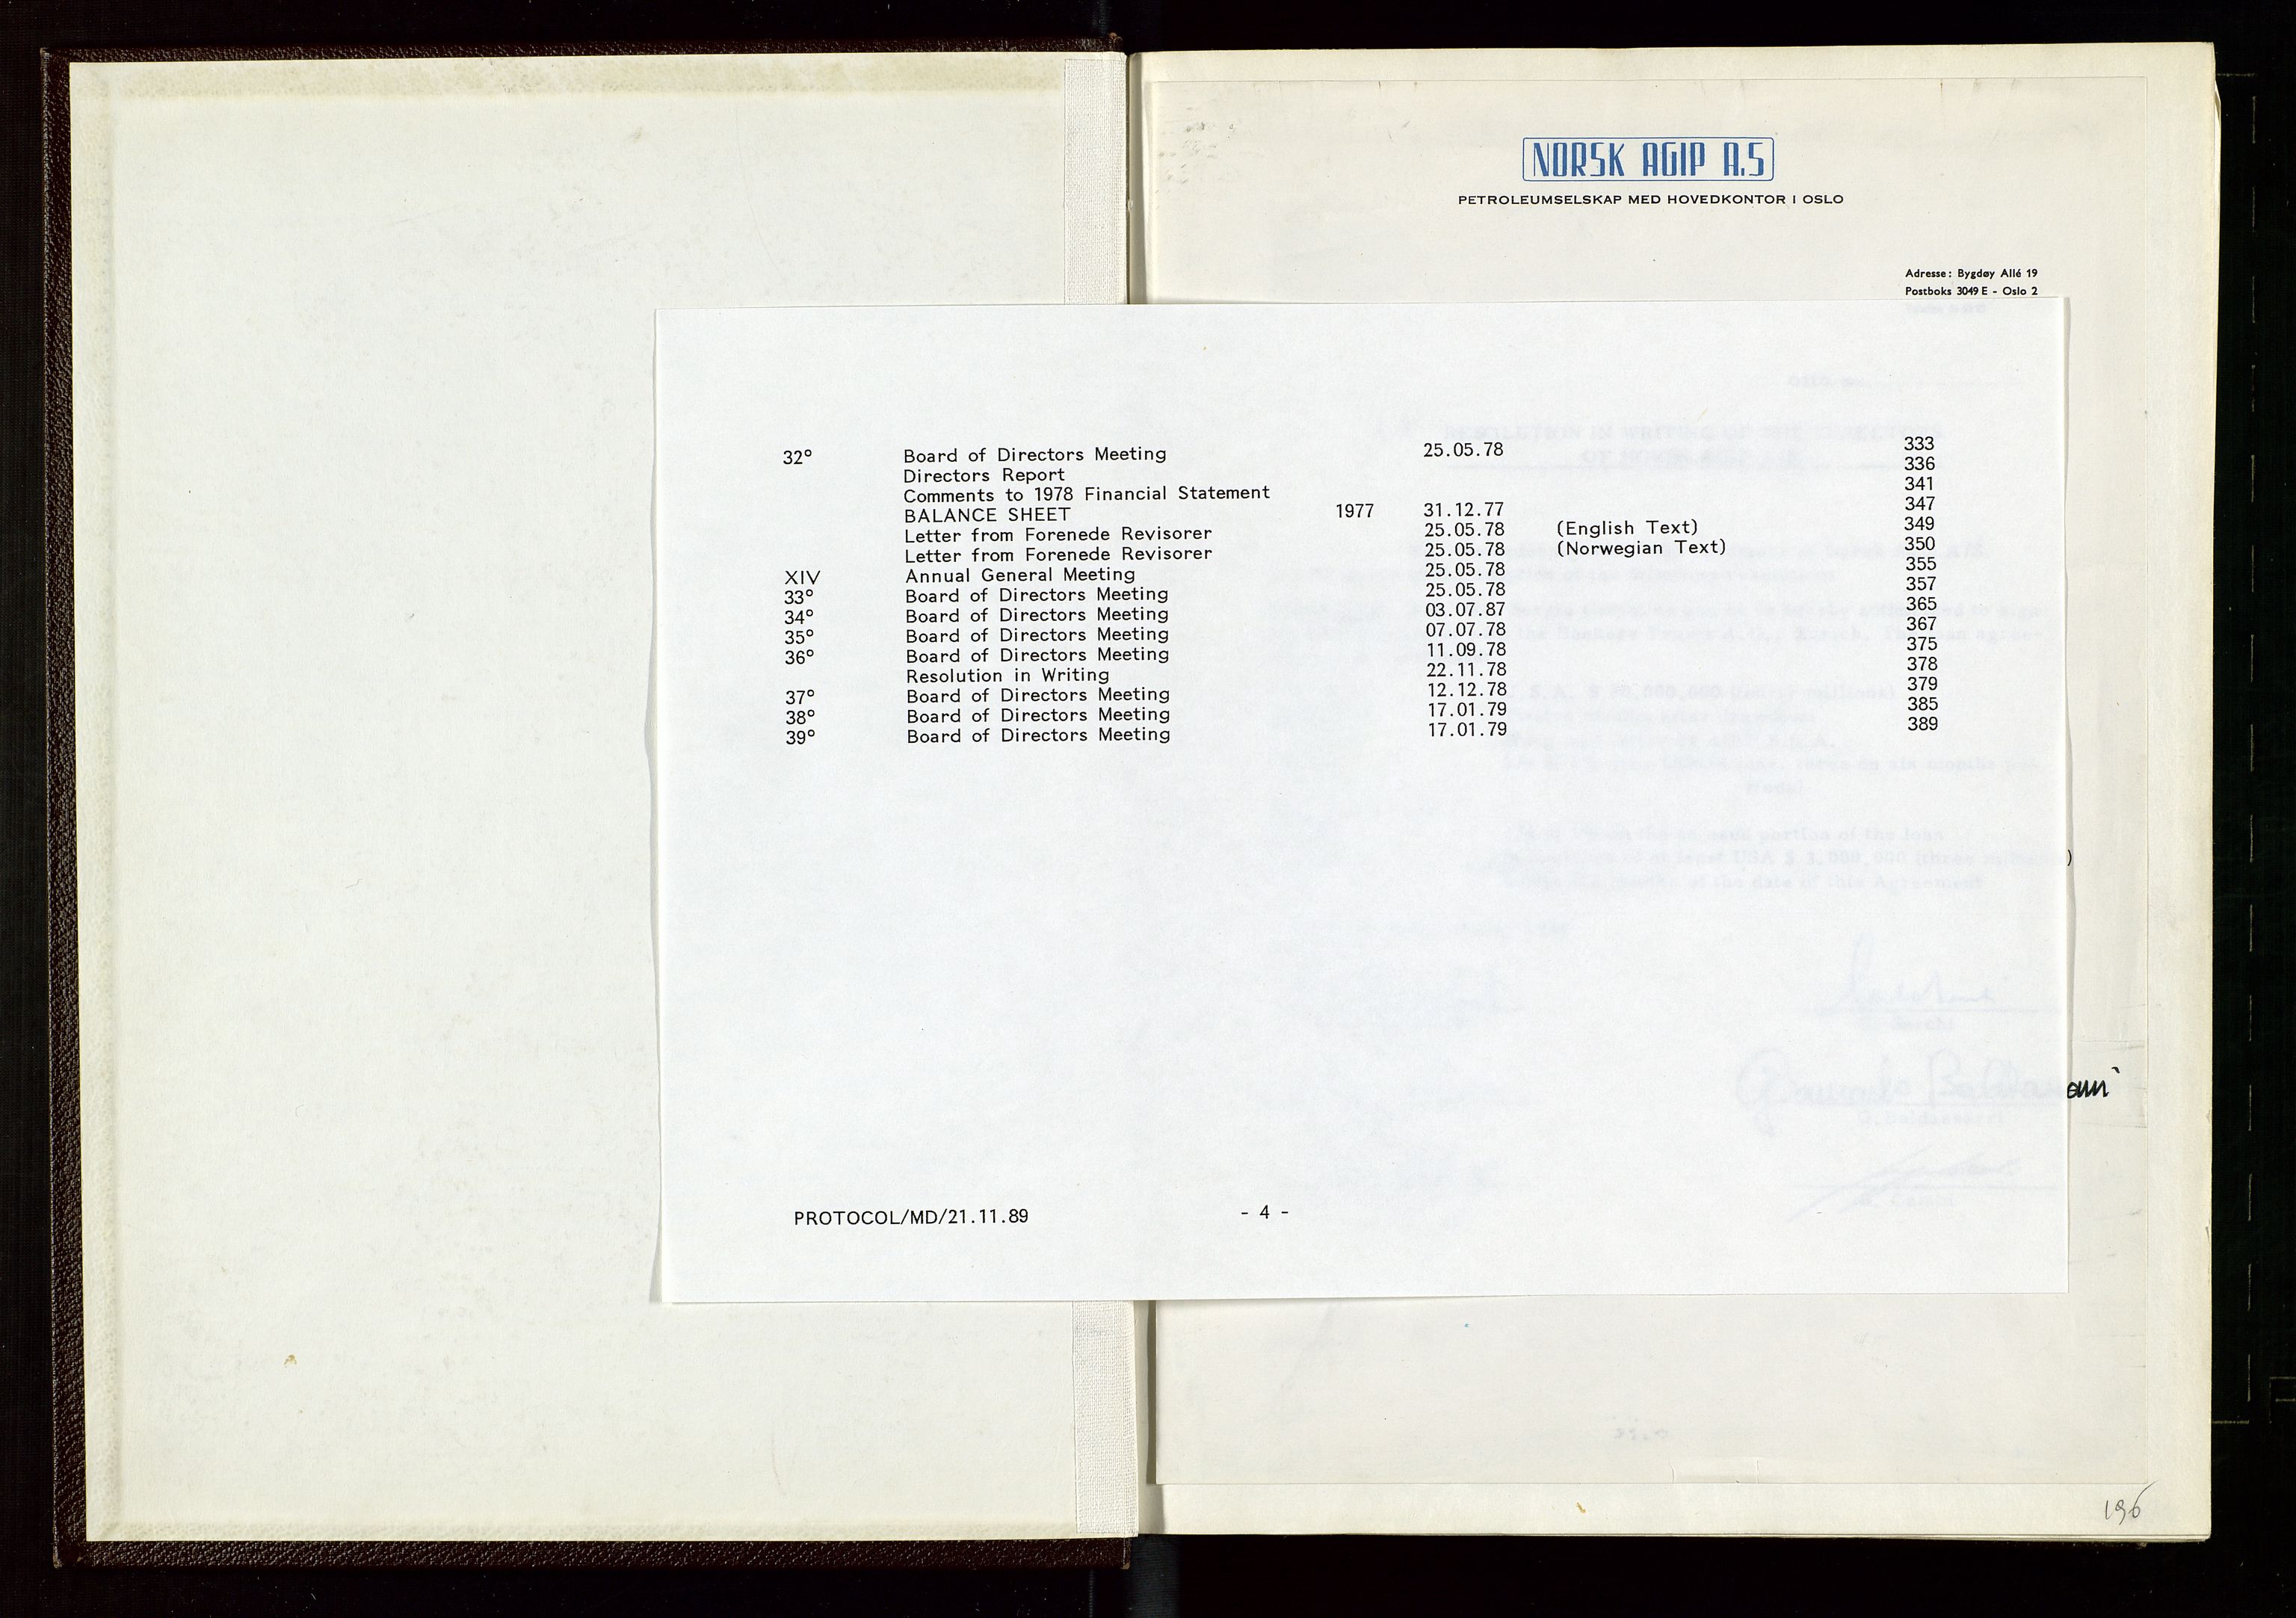 Pa 1583 - Norsk Agip AS, SAST/A-102138/A/Aa/L0002: General assembly and Board of Directors meeting minutes, 1972-1979, s. 196